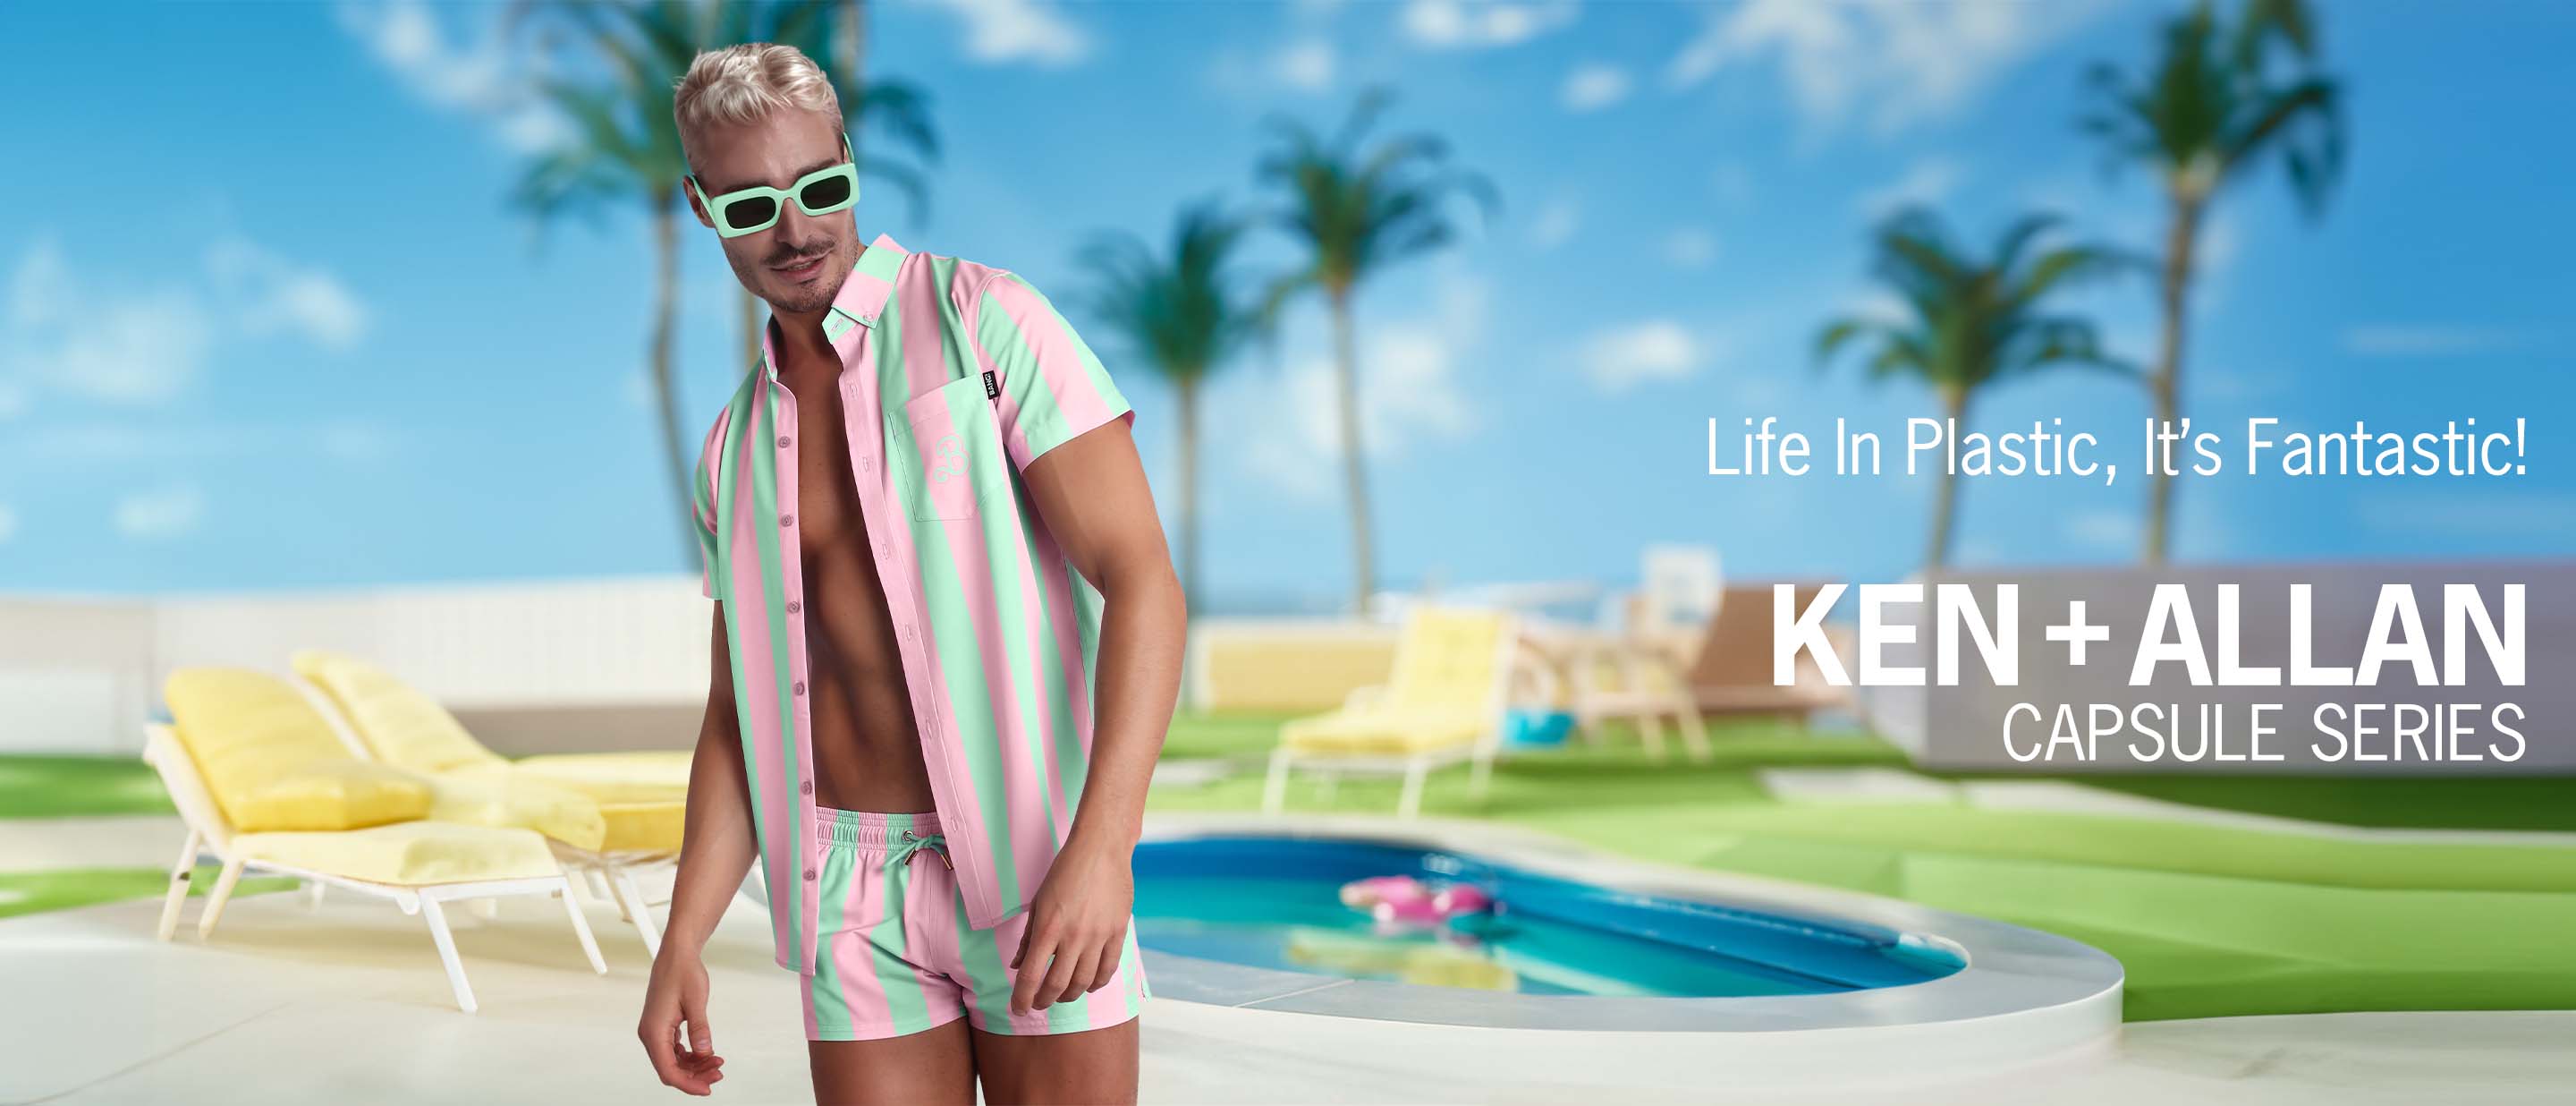 The KEN & ALLAN series by BANG Miami. Featuring men's beach shorts and short-sleeve shirts as seen on Barbie Movie worn by Ryan Gosling as Ken and Michael Cera as Allan.